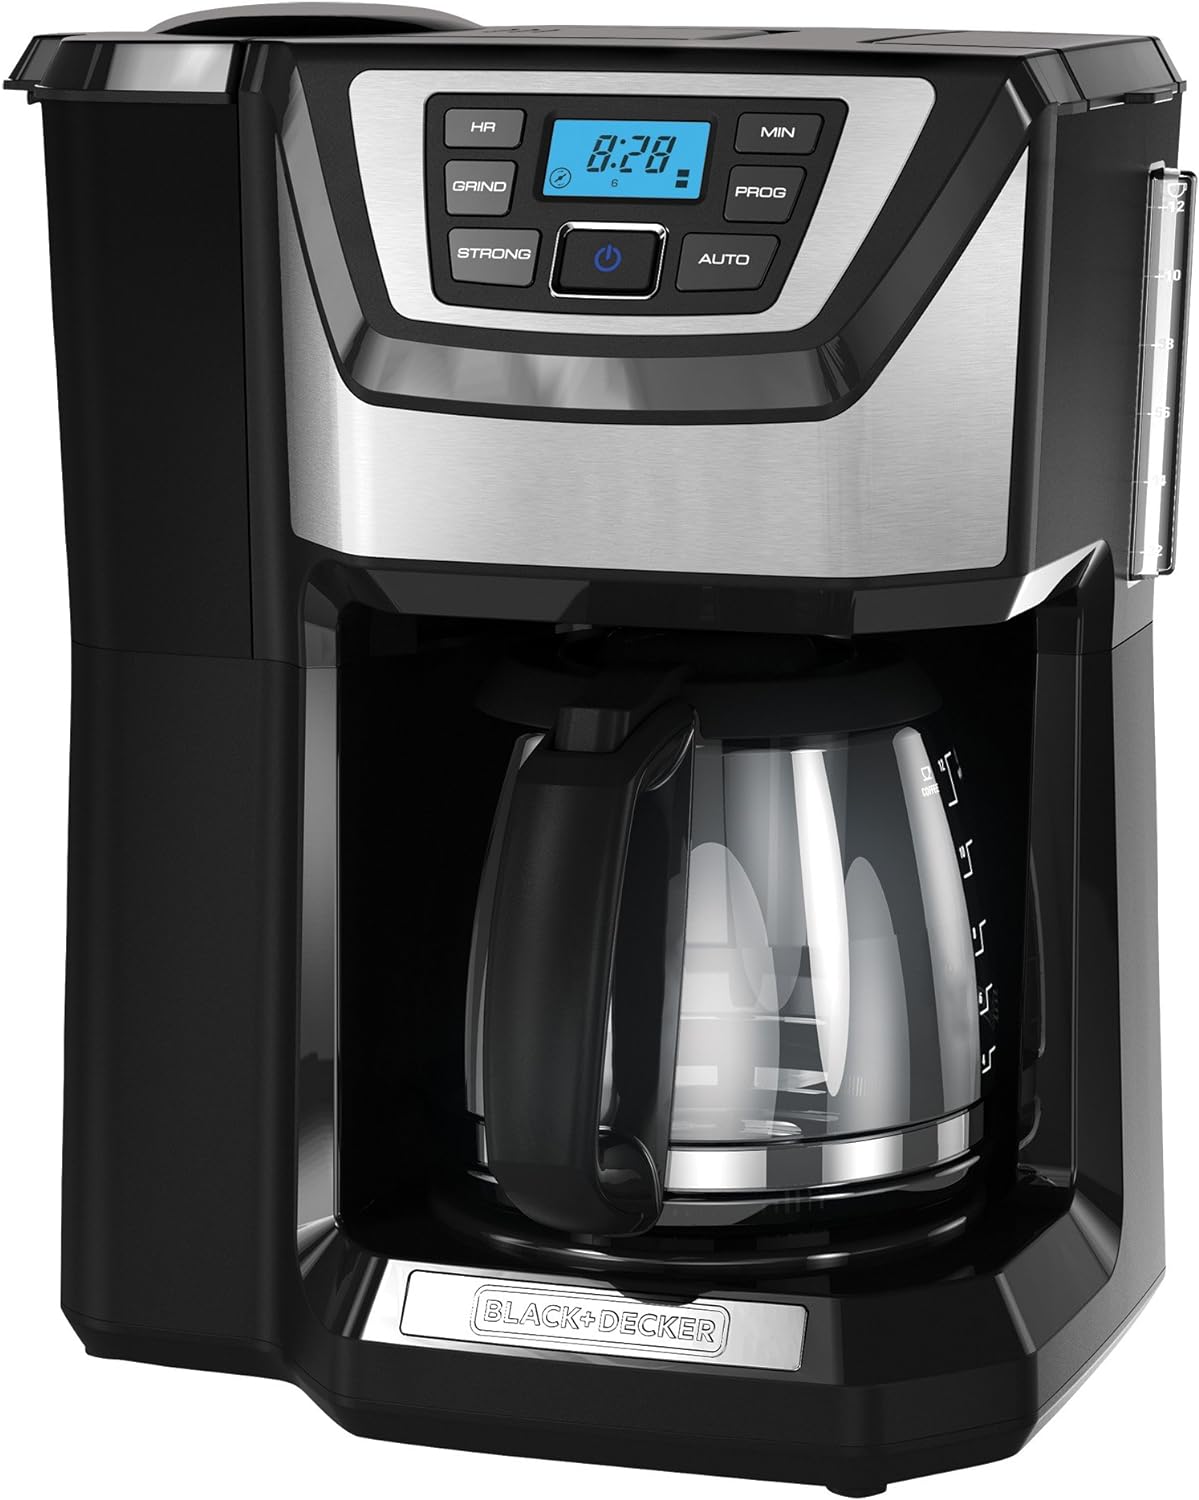 BLACK DECKER 12-Cup Mill and Brew Coffe Maker, CM5000B, 24-Hour Programble, Built-in Grinder, Sneak-A-Cup, Permanent Washable Fitler